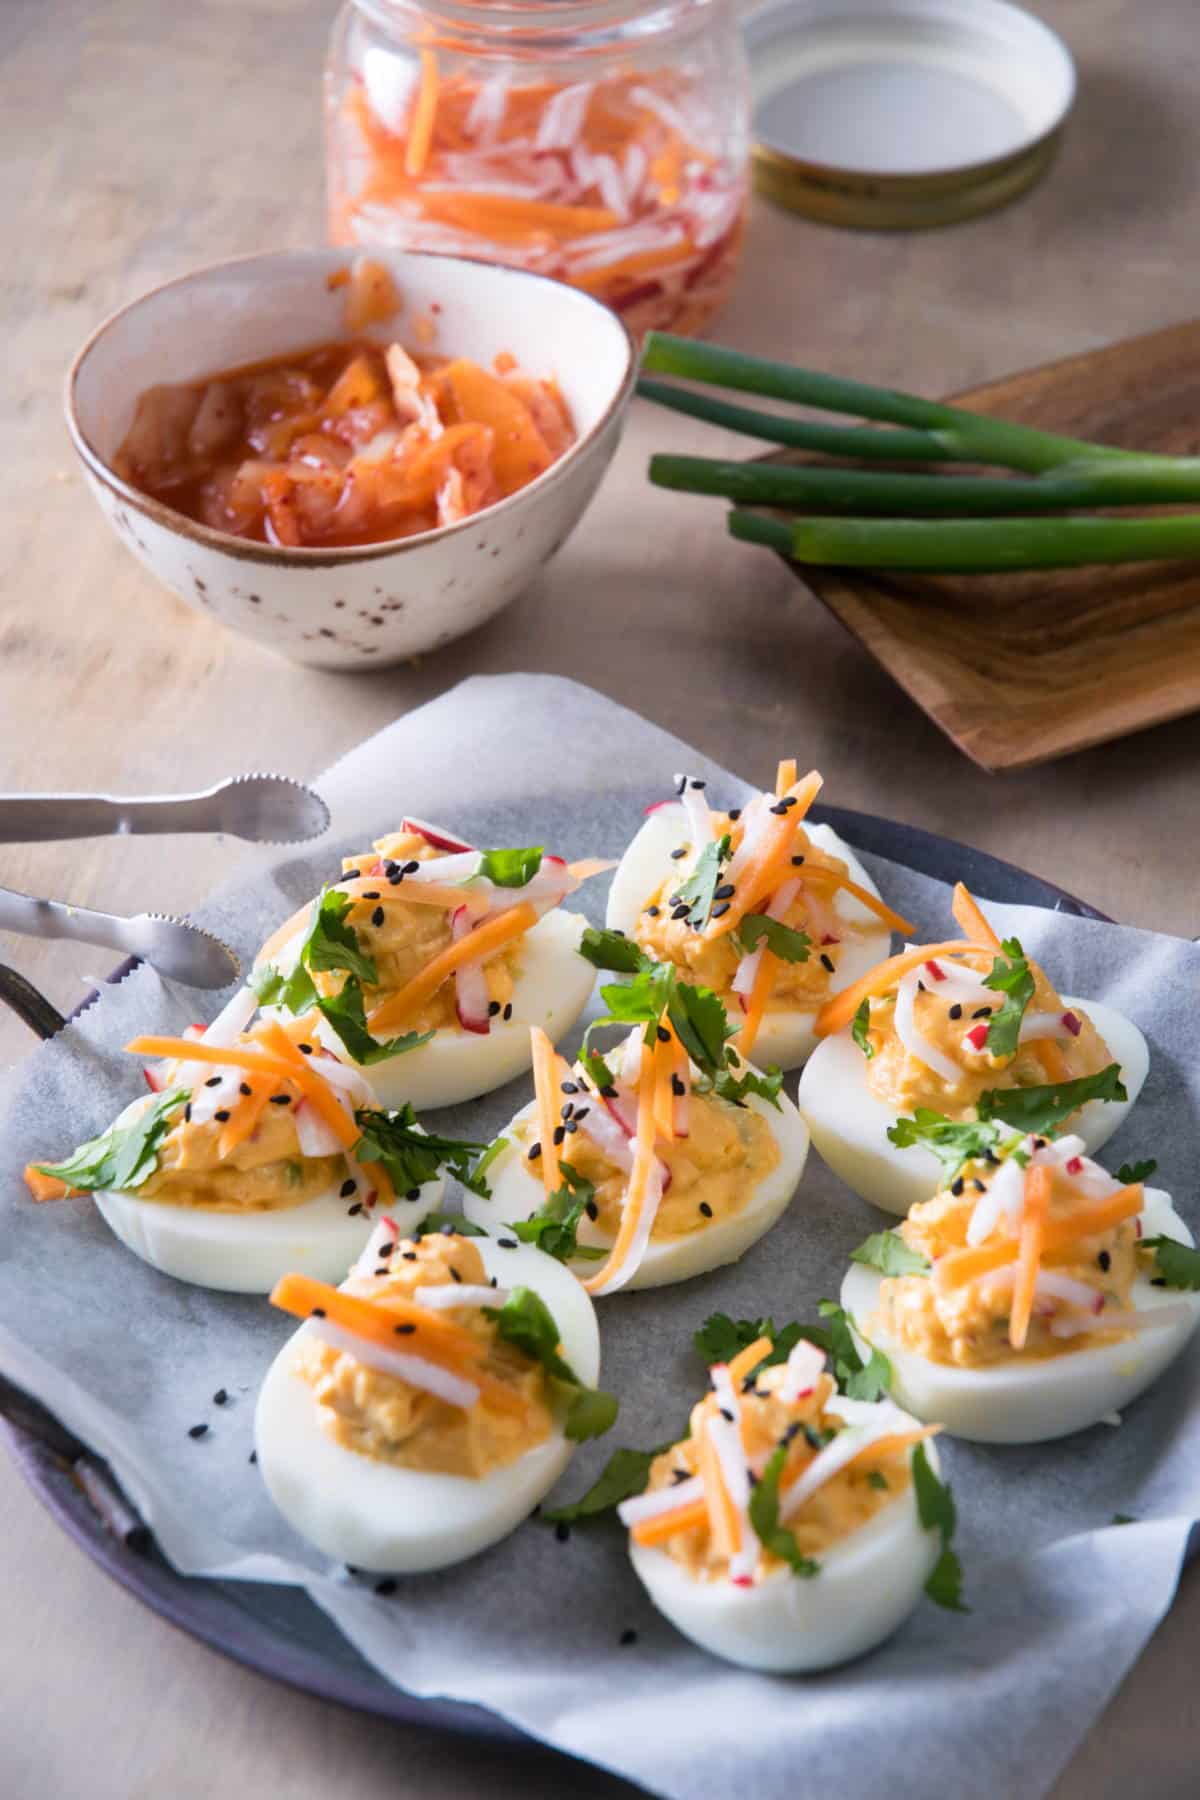 Kimchi deviled eggs on a plate with sliced green onion garnish, kimchi in a bowl in the background.